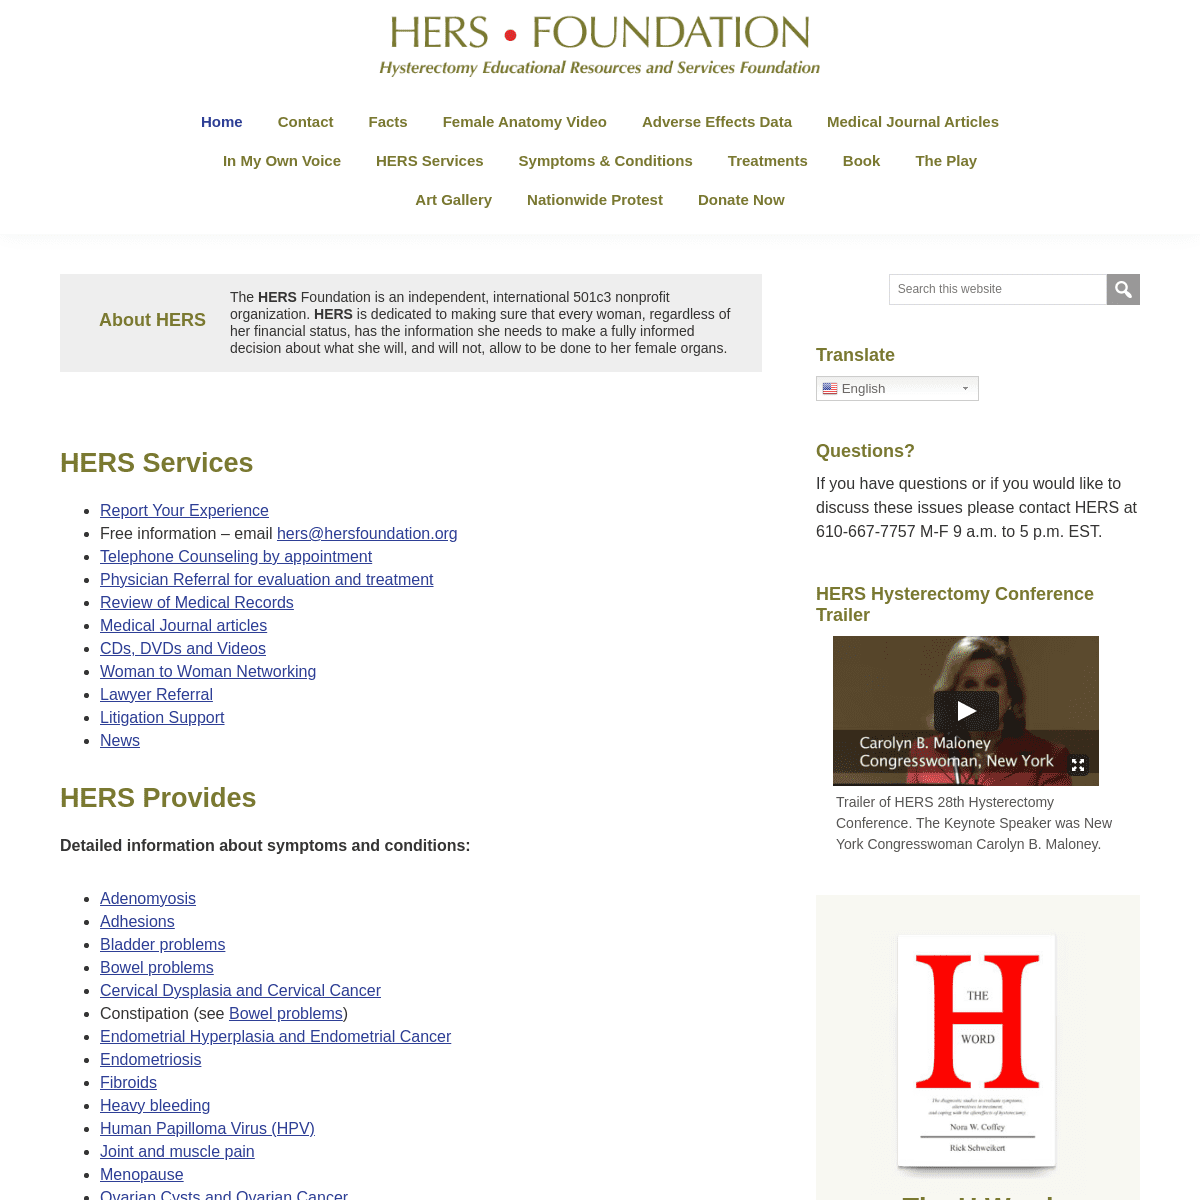 A complete backup of https://hersfoundation.org